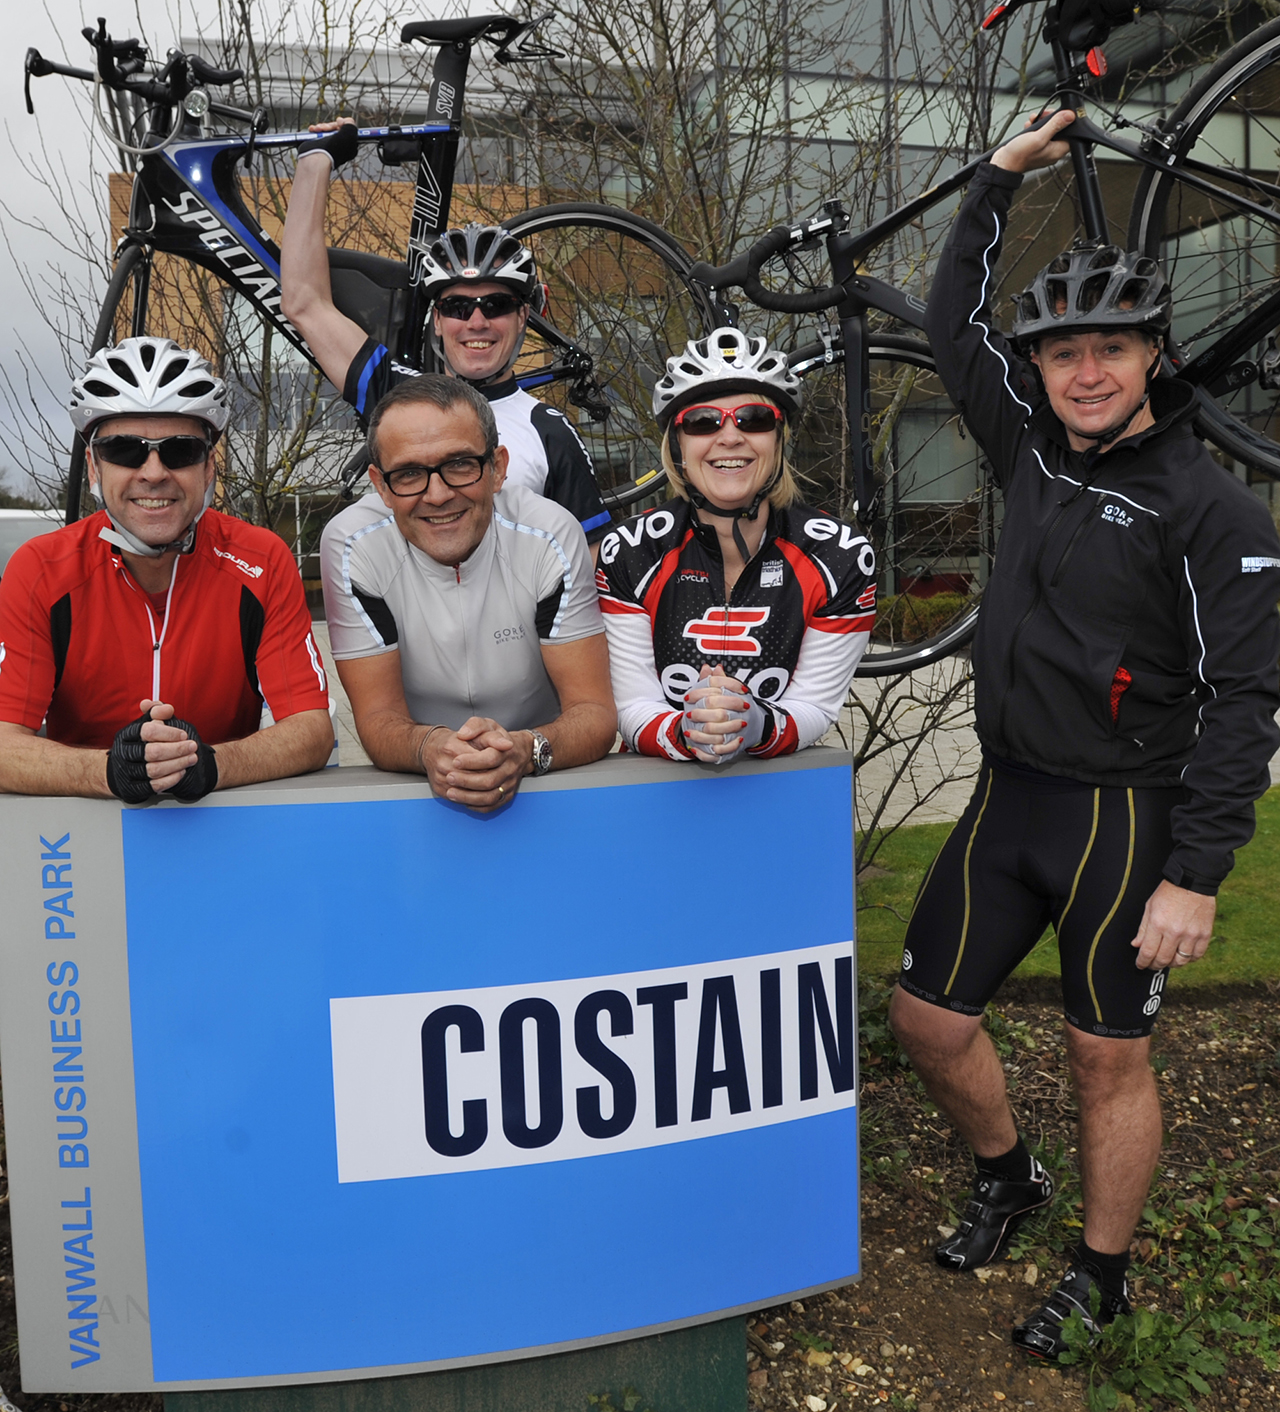 Ironman Challenge For Costain